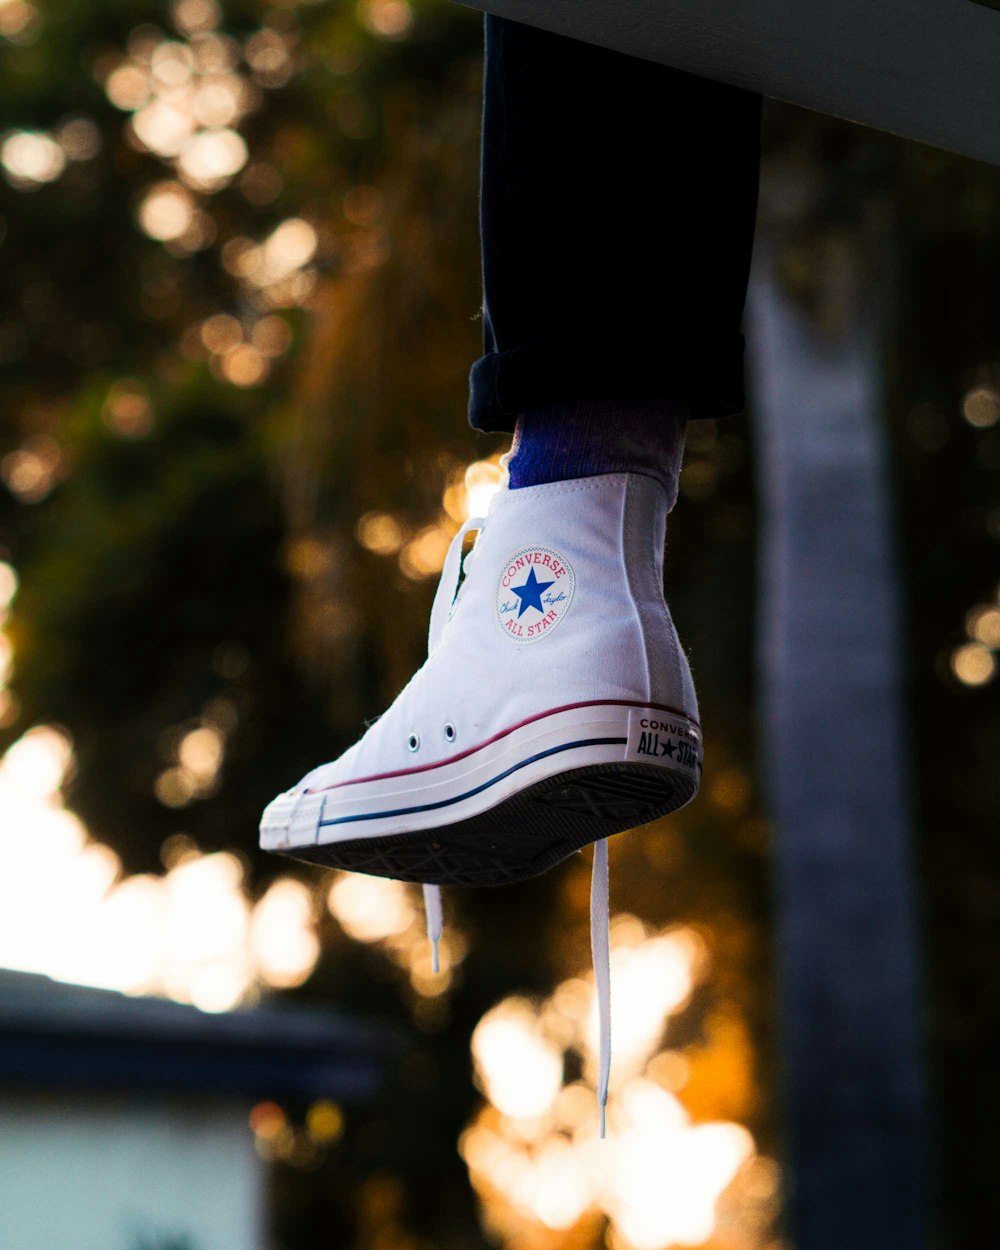 Converse All Star Pictures | Download Free Images on Unsplash